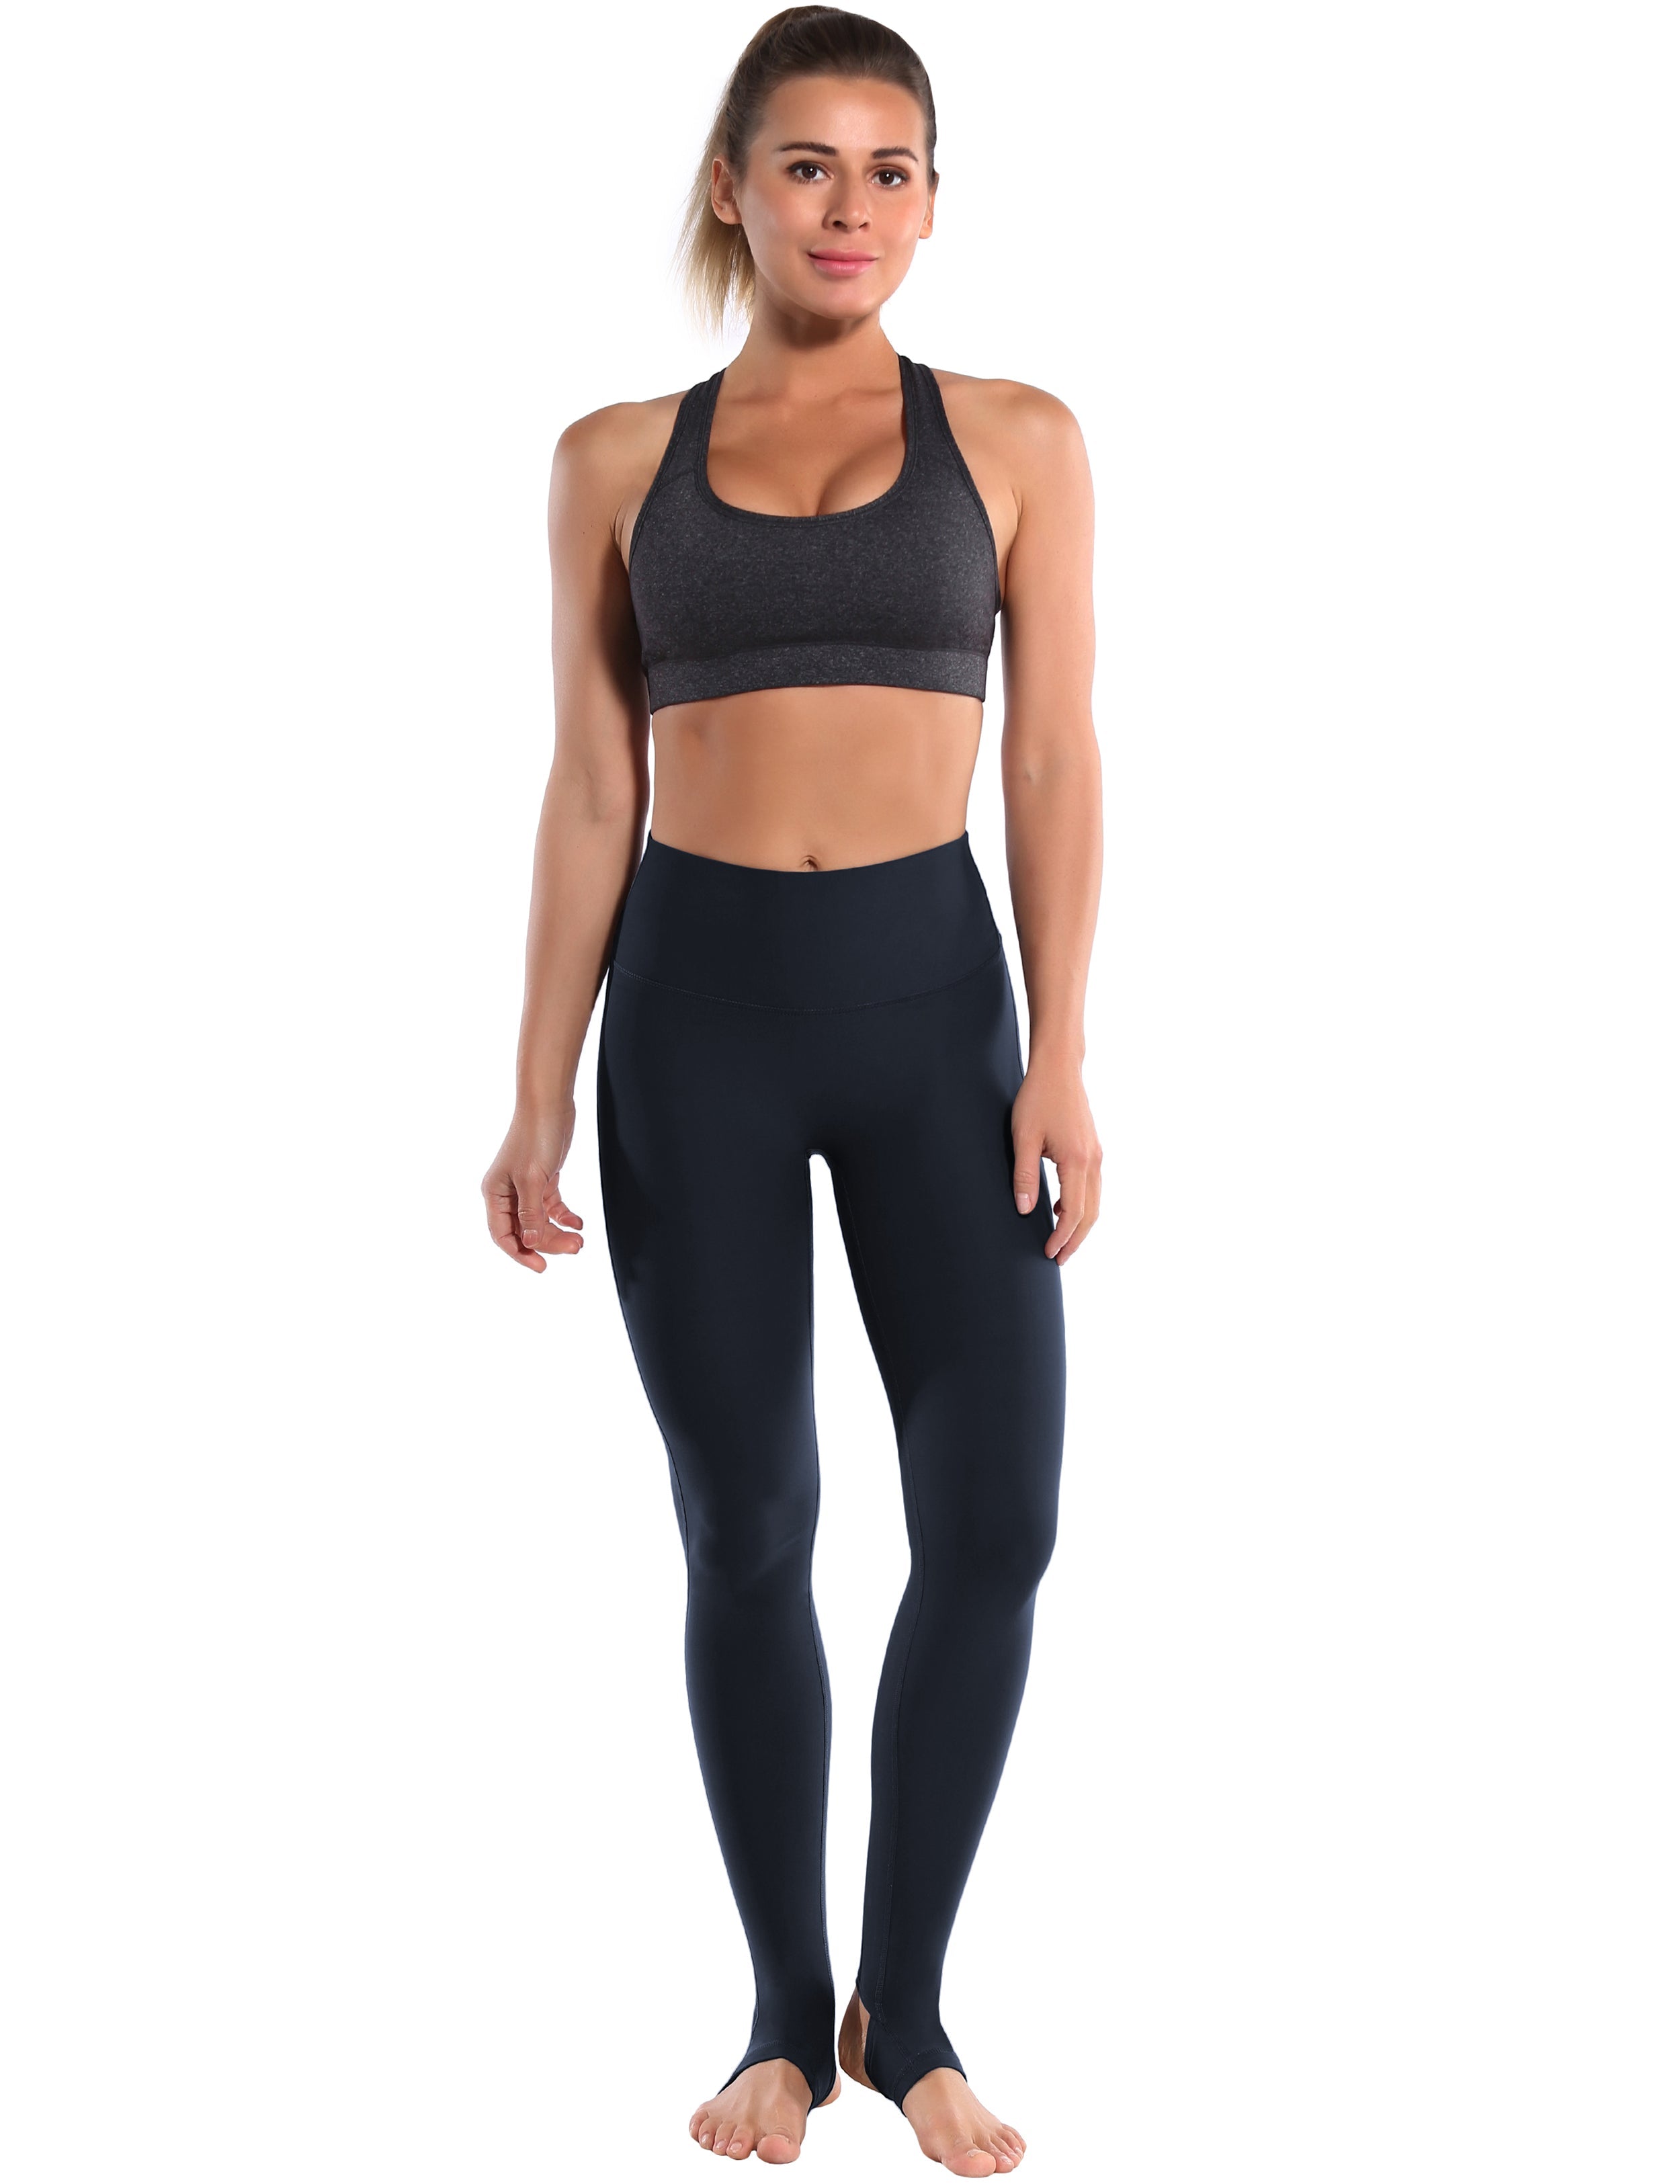 Over the Heel Jogging Pants darknavy Over the Heel Design 87%Nylon/13%Spandex Fabric doesn't attract lint easily 4-way stretch No see-through Moisture-wicking Tummy control